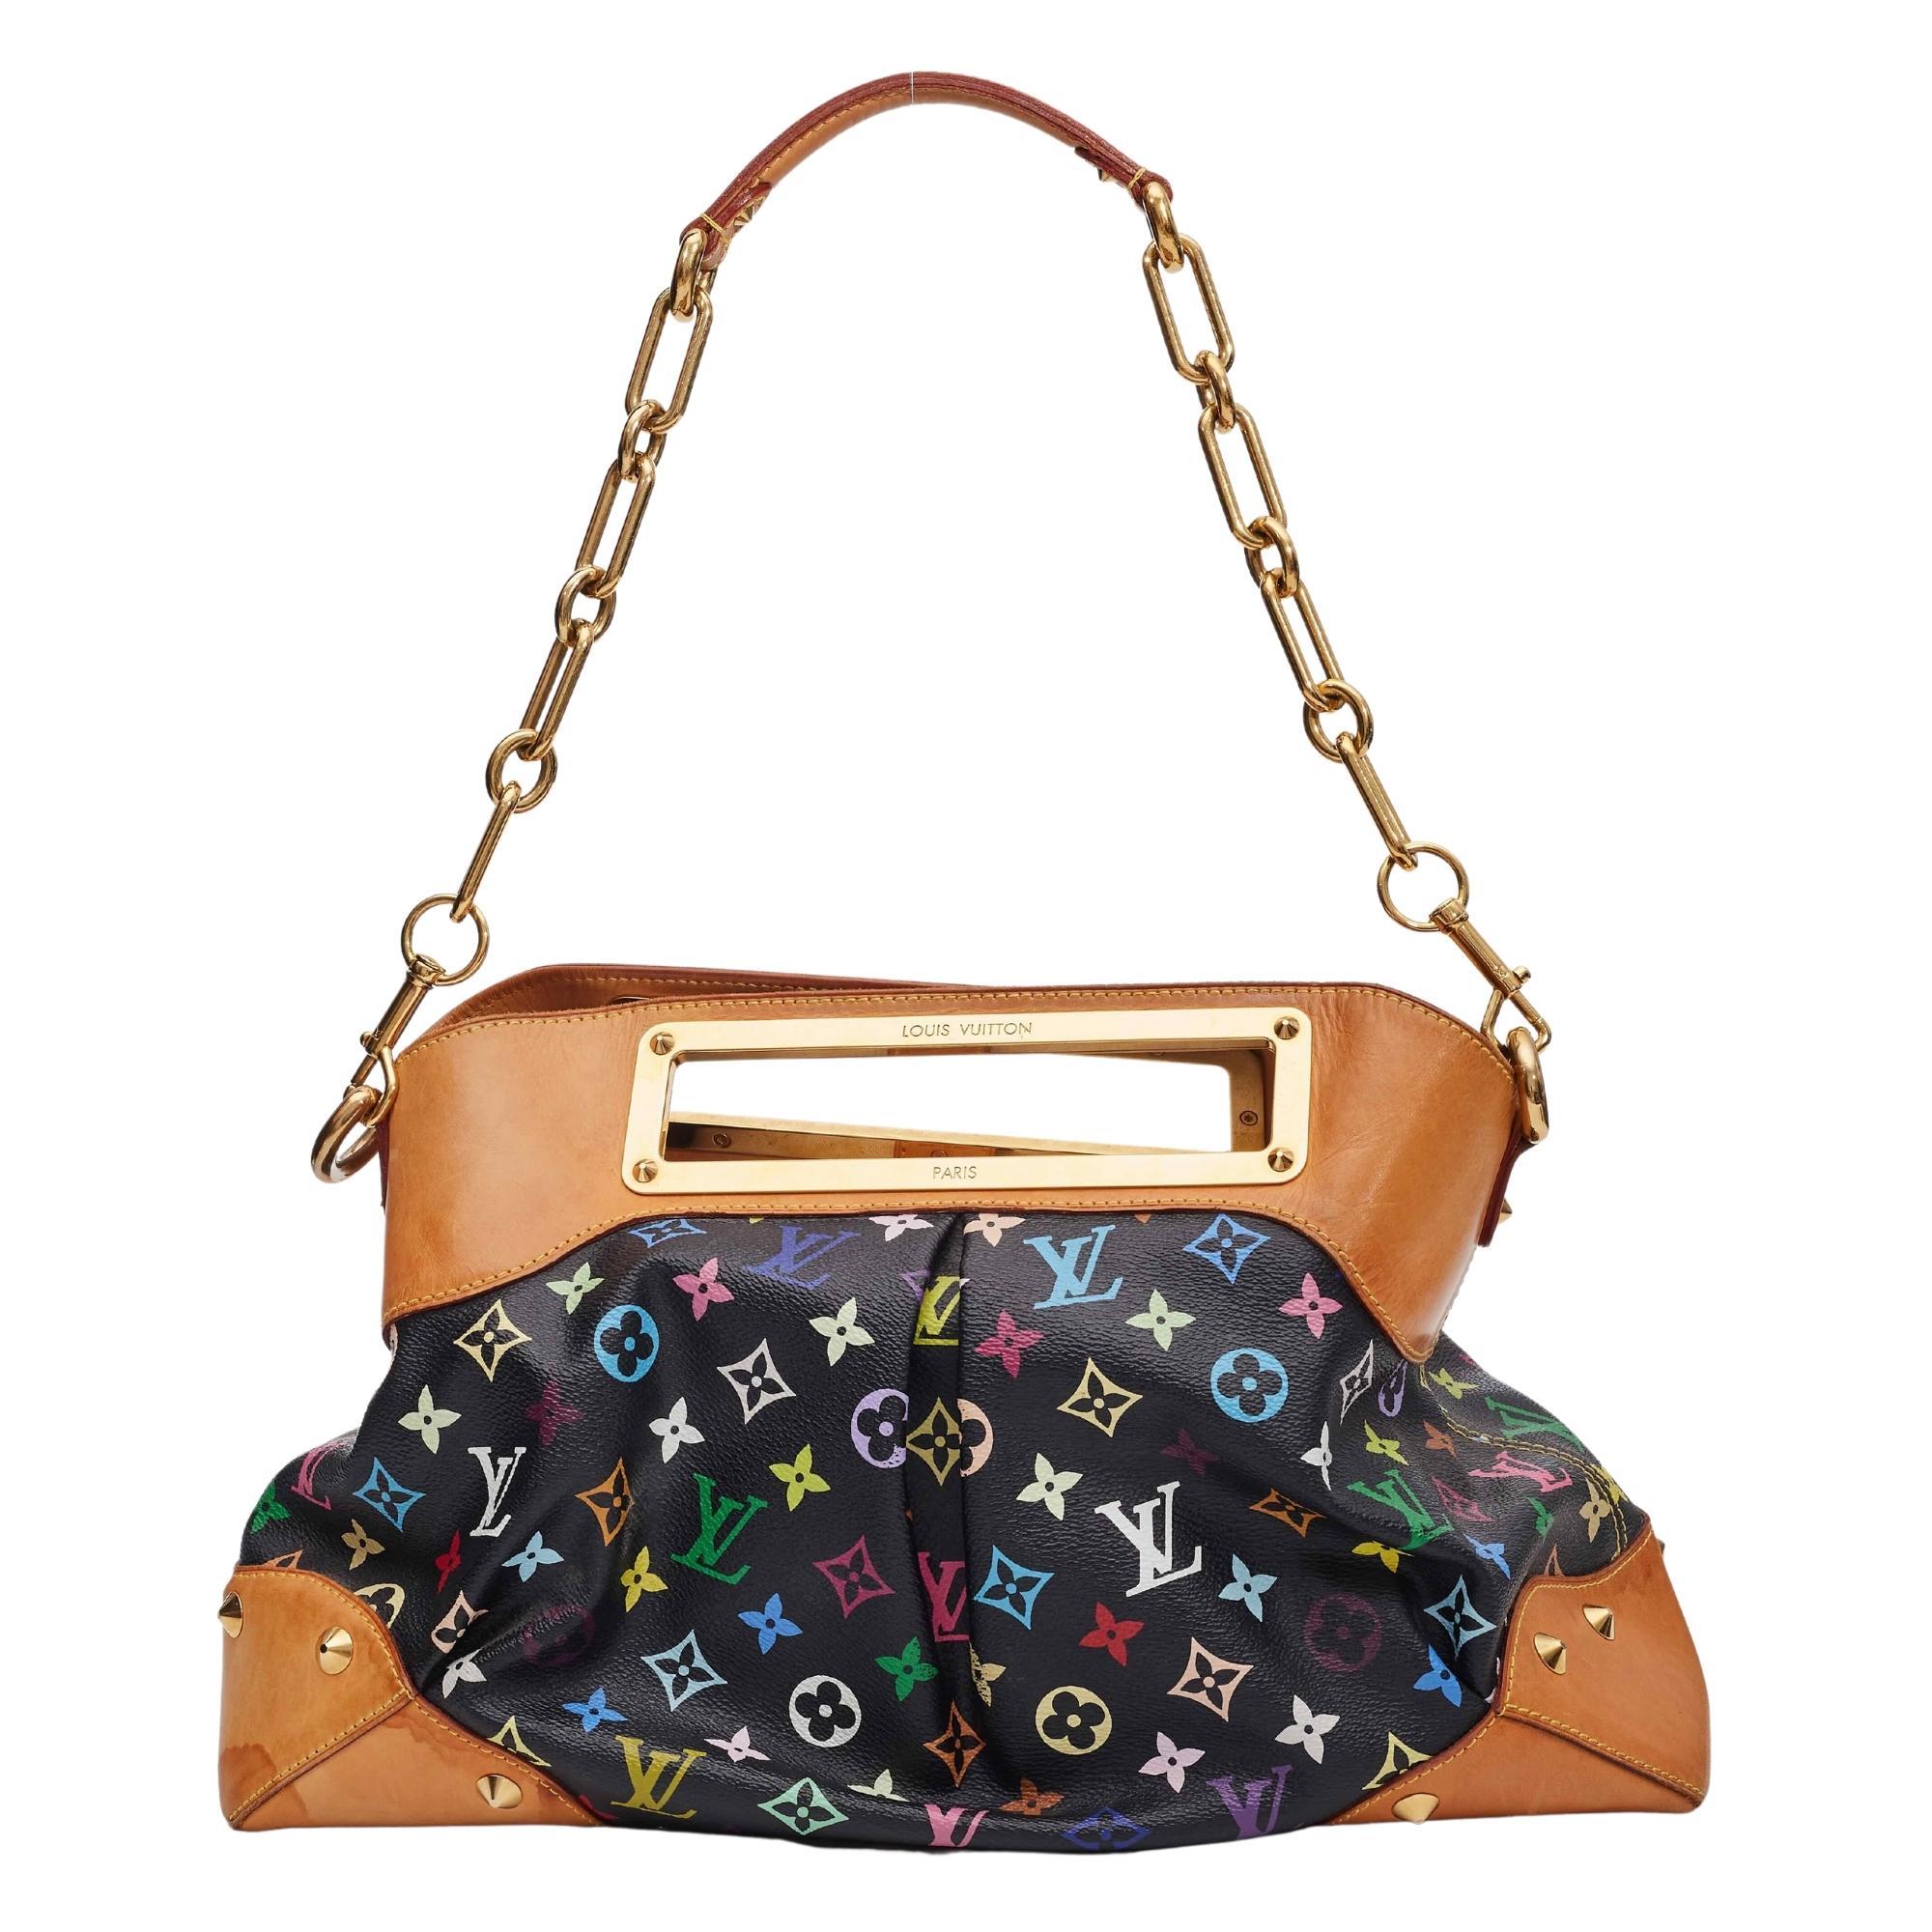 Louis Monogram Multicolor Judy GM in Black. This bag is made of multicolour Louis Vuitton monogram in 33 vivid colors on black toile canvas. This bag features vachetta cowhide leather base corners and a 